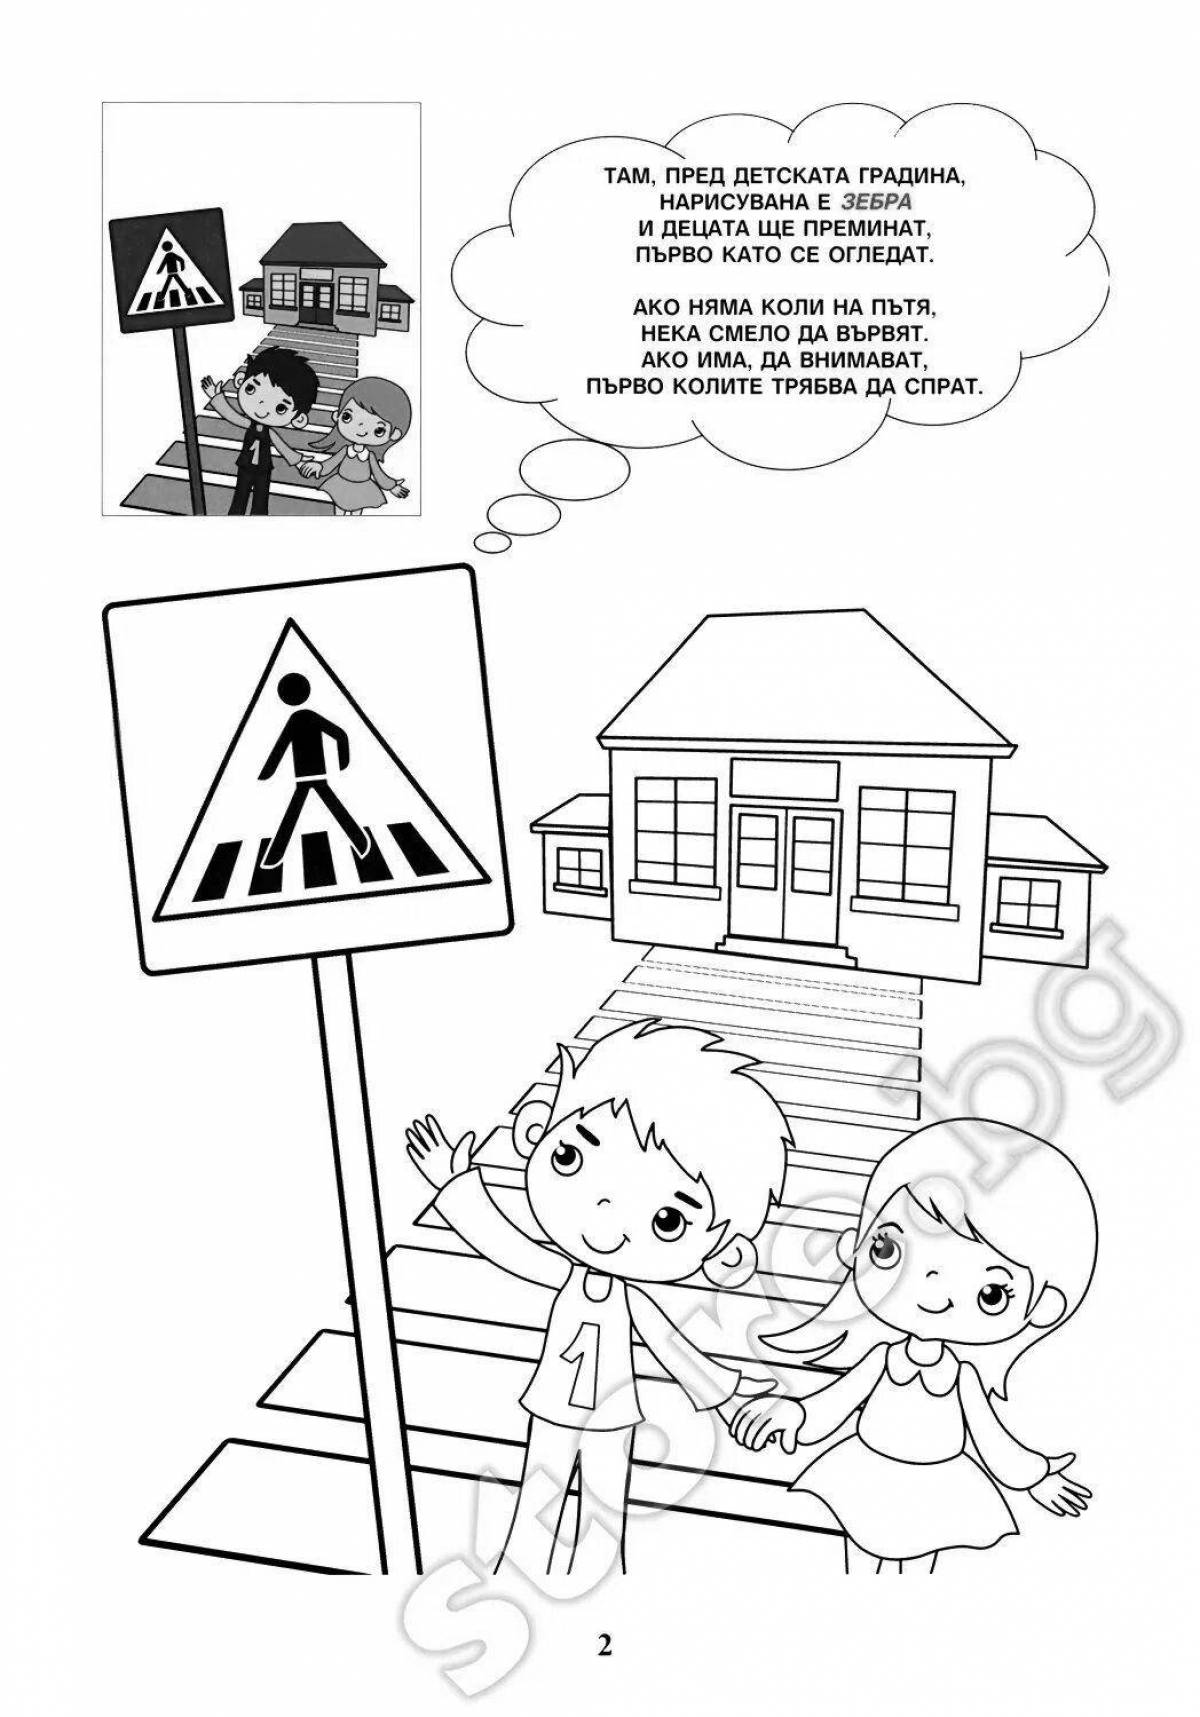 According to traffic rules for preschoolers preparatory group #2